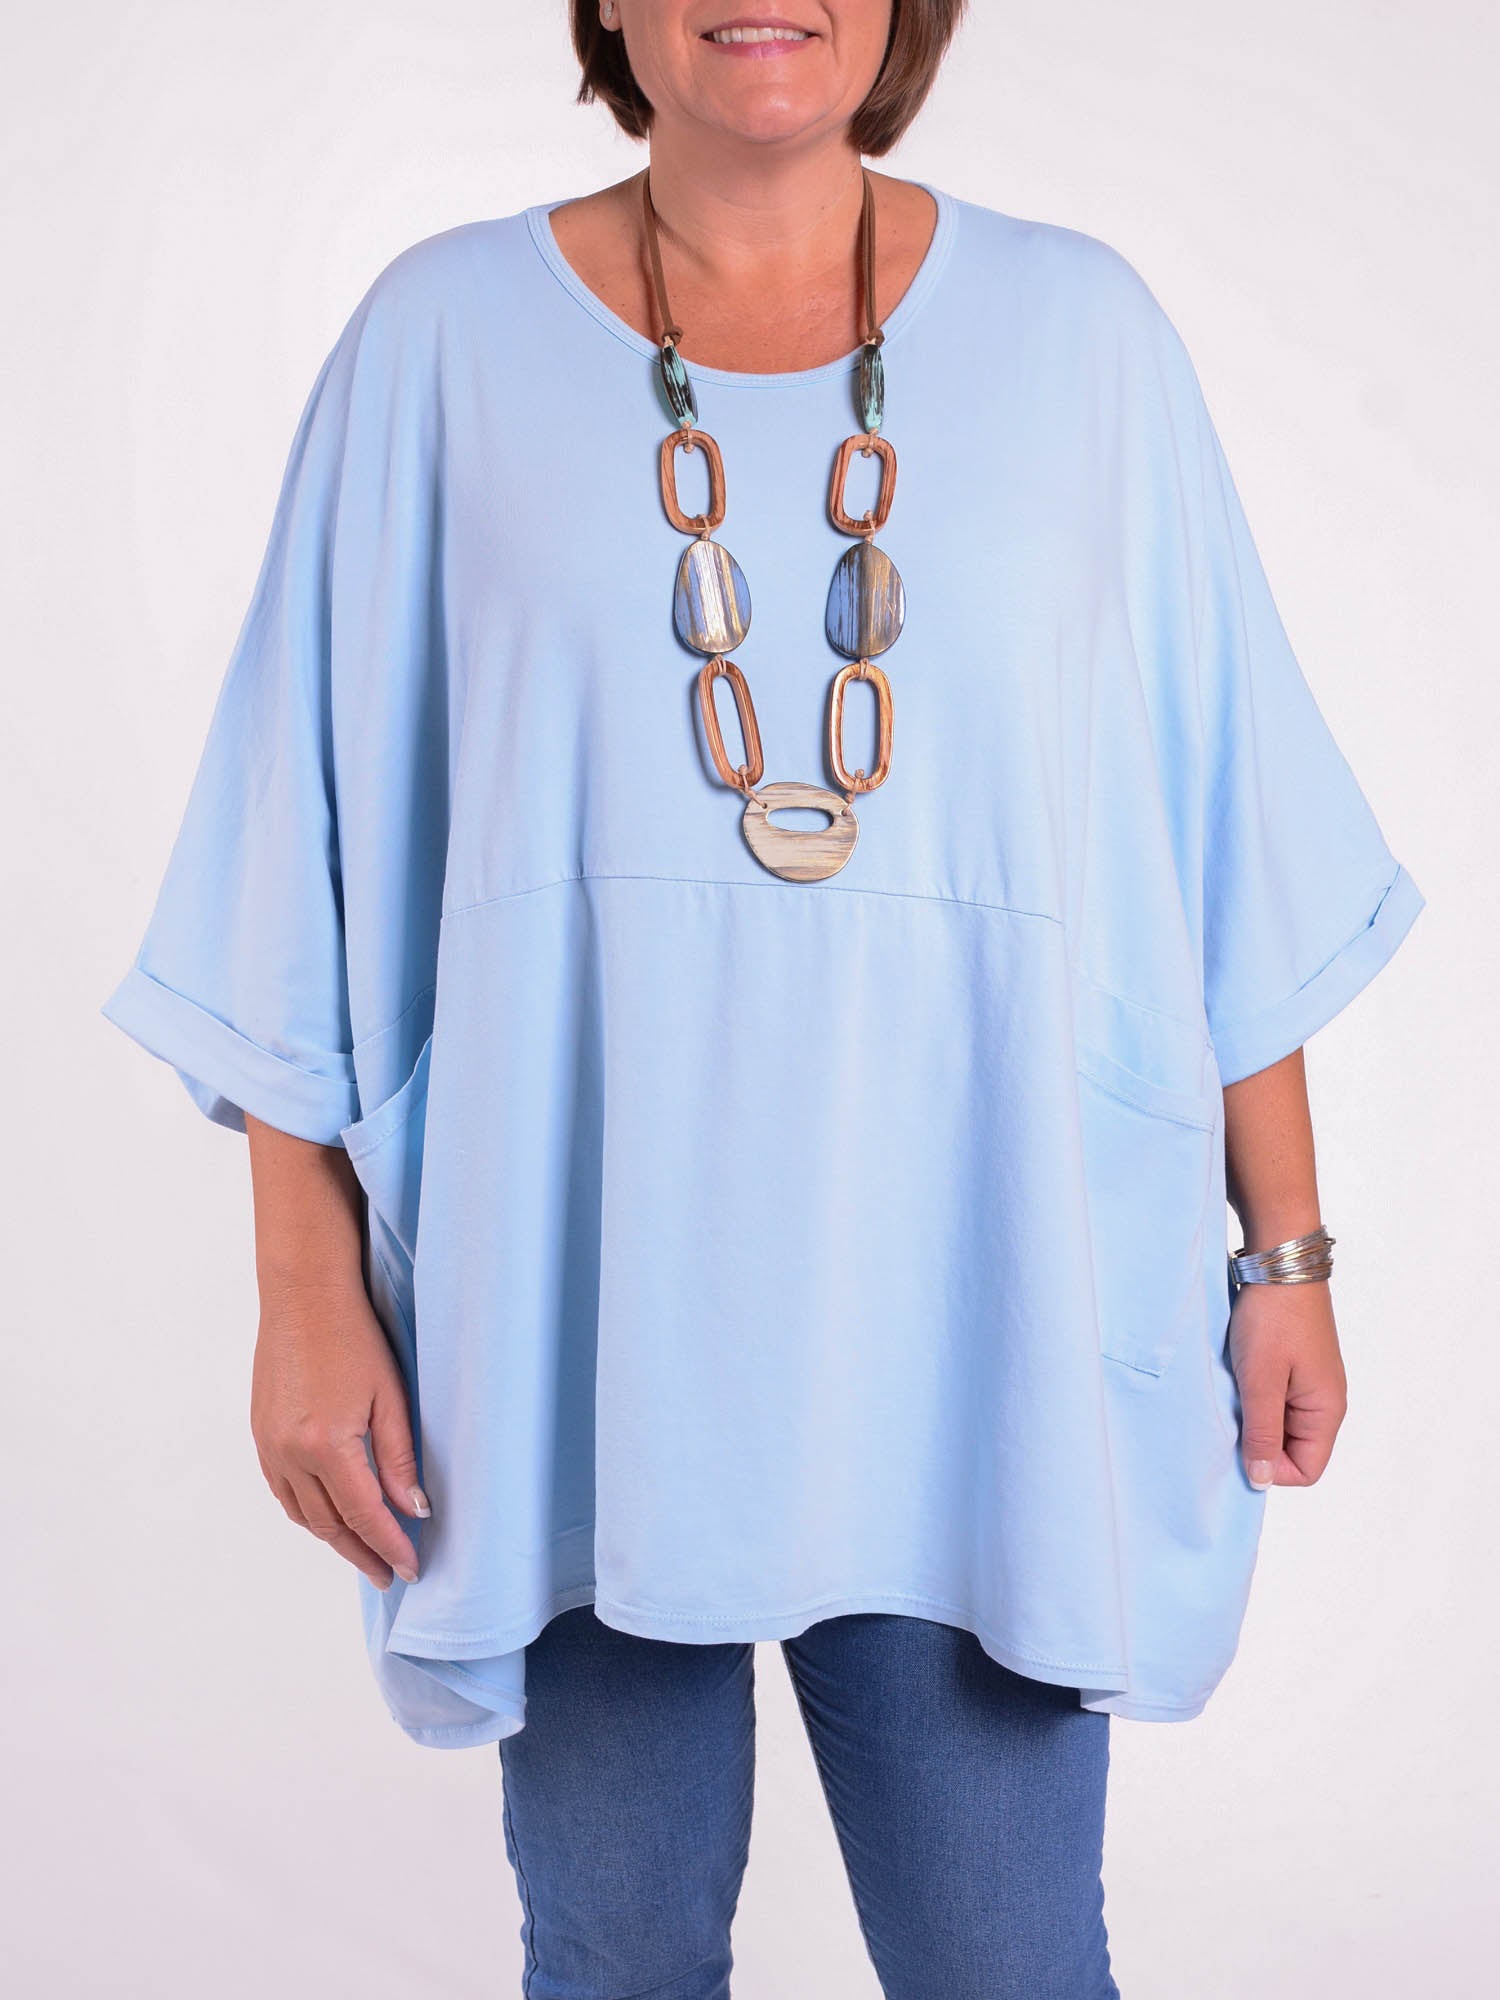 Lagenlook Oversized Jersey Cotton Tunic -10077C PLAIN, Tops & Shirts, Pure Plus Clothing, Lagenlook Clothing, Plus Size Fashion, Over 50 Fashion